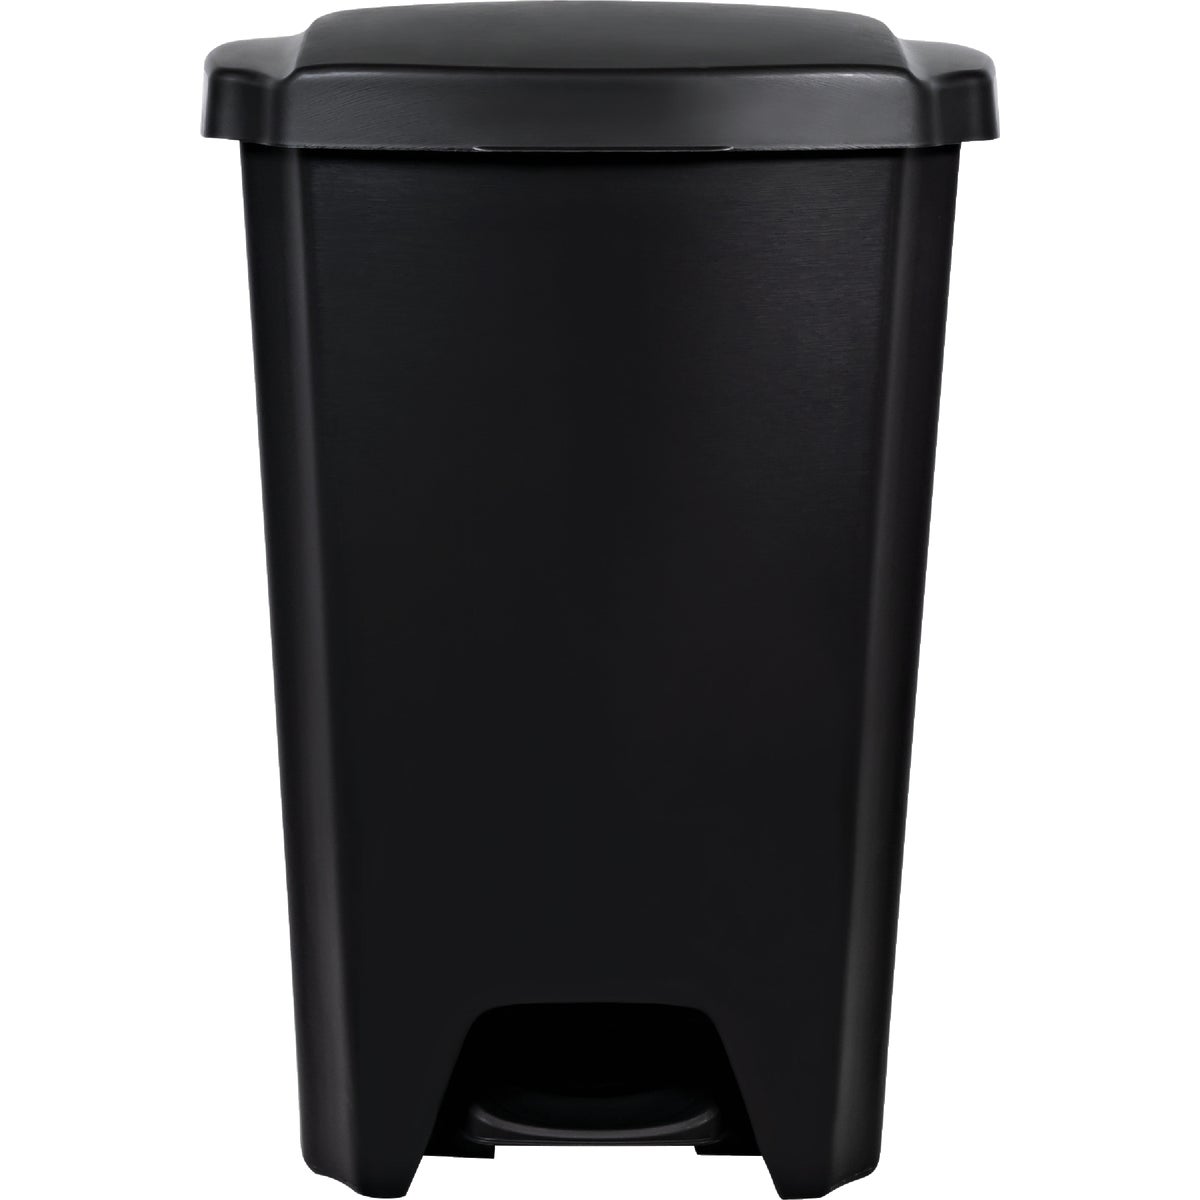 Item 602151, Foot operated, hands-free wastebasket has a wide opening. Keep a 13 Gal.